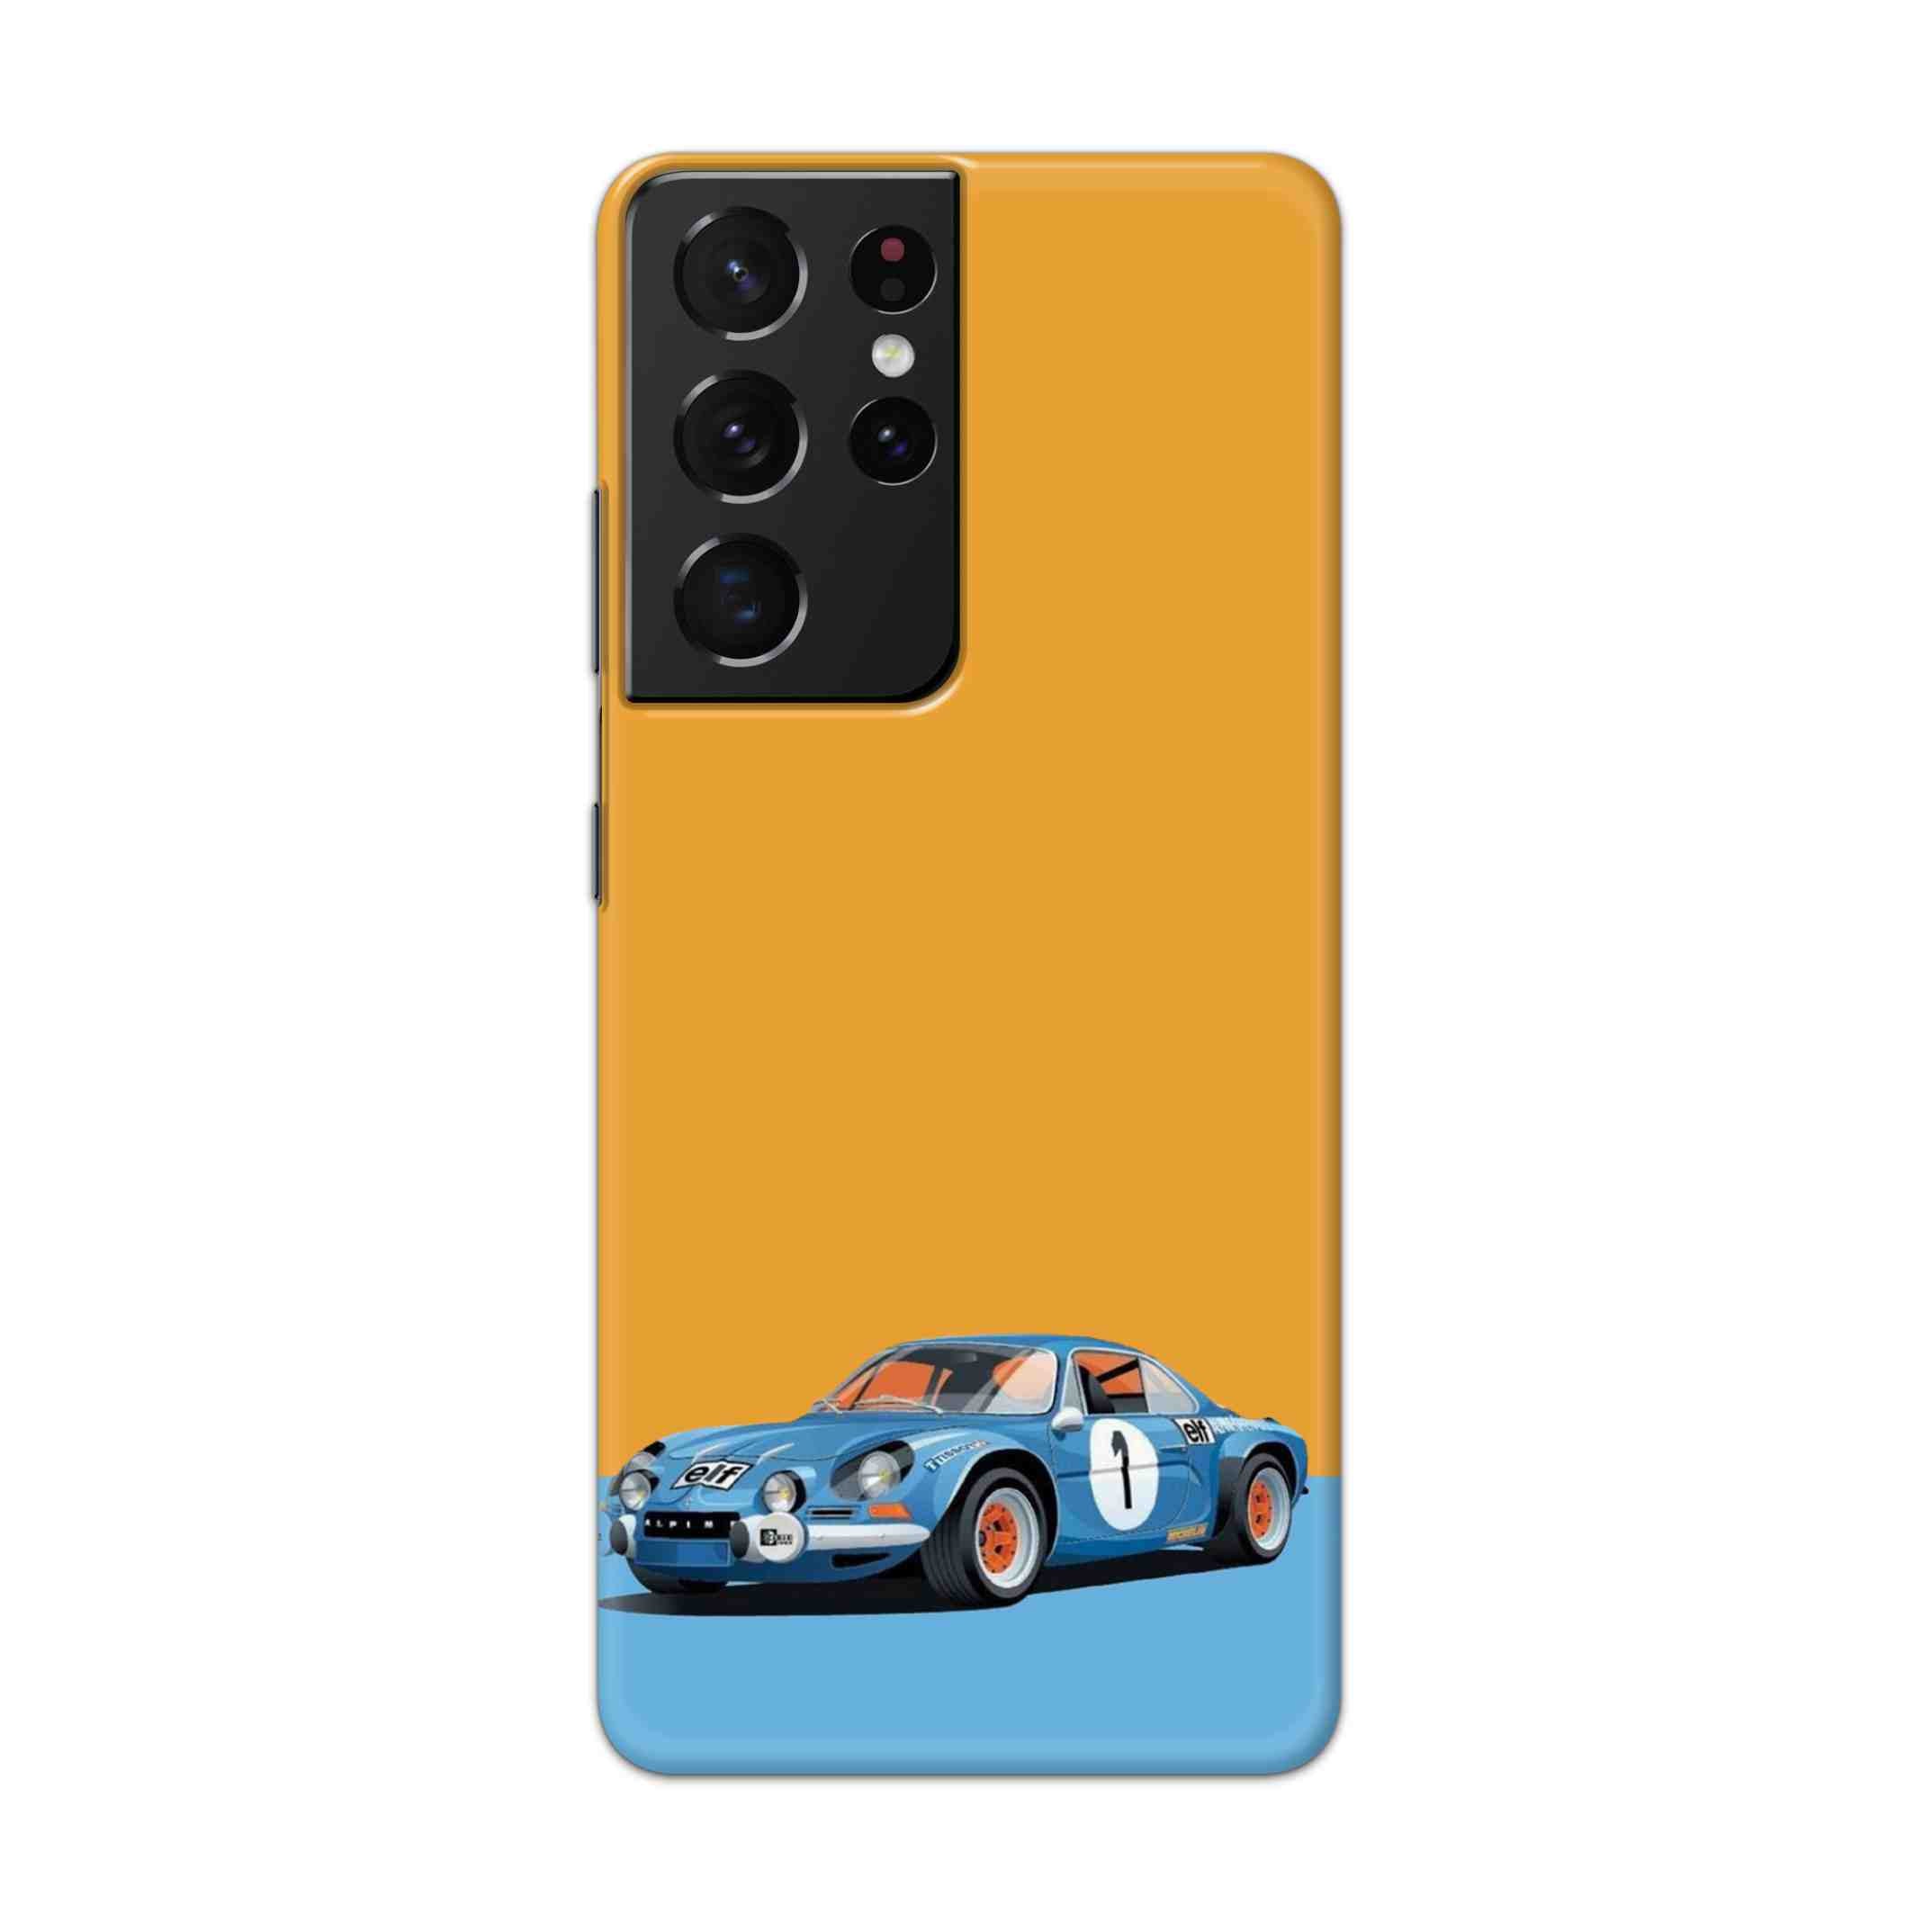 Buy Ferrari F1 Hard Back Mobile Phone Case Cover For Samsung Galaxy S21 Ultra Online